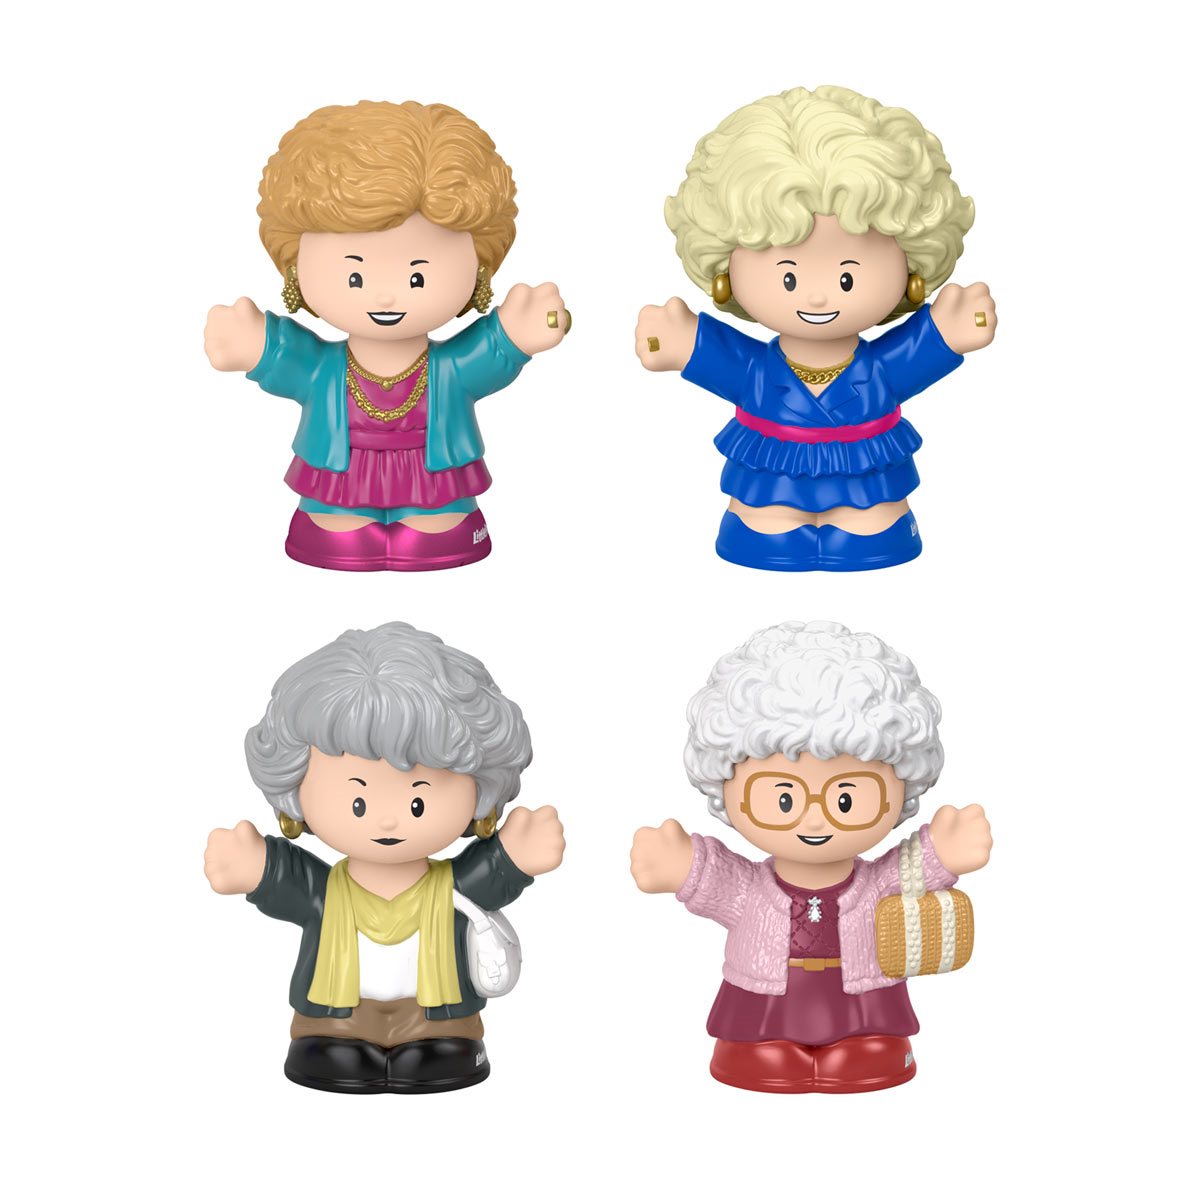 The Golden Girls by Little People Collector Set